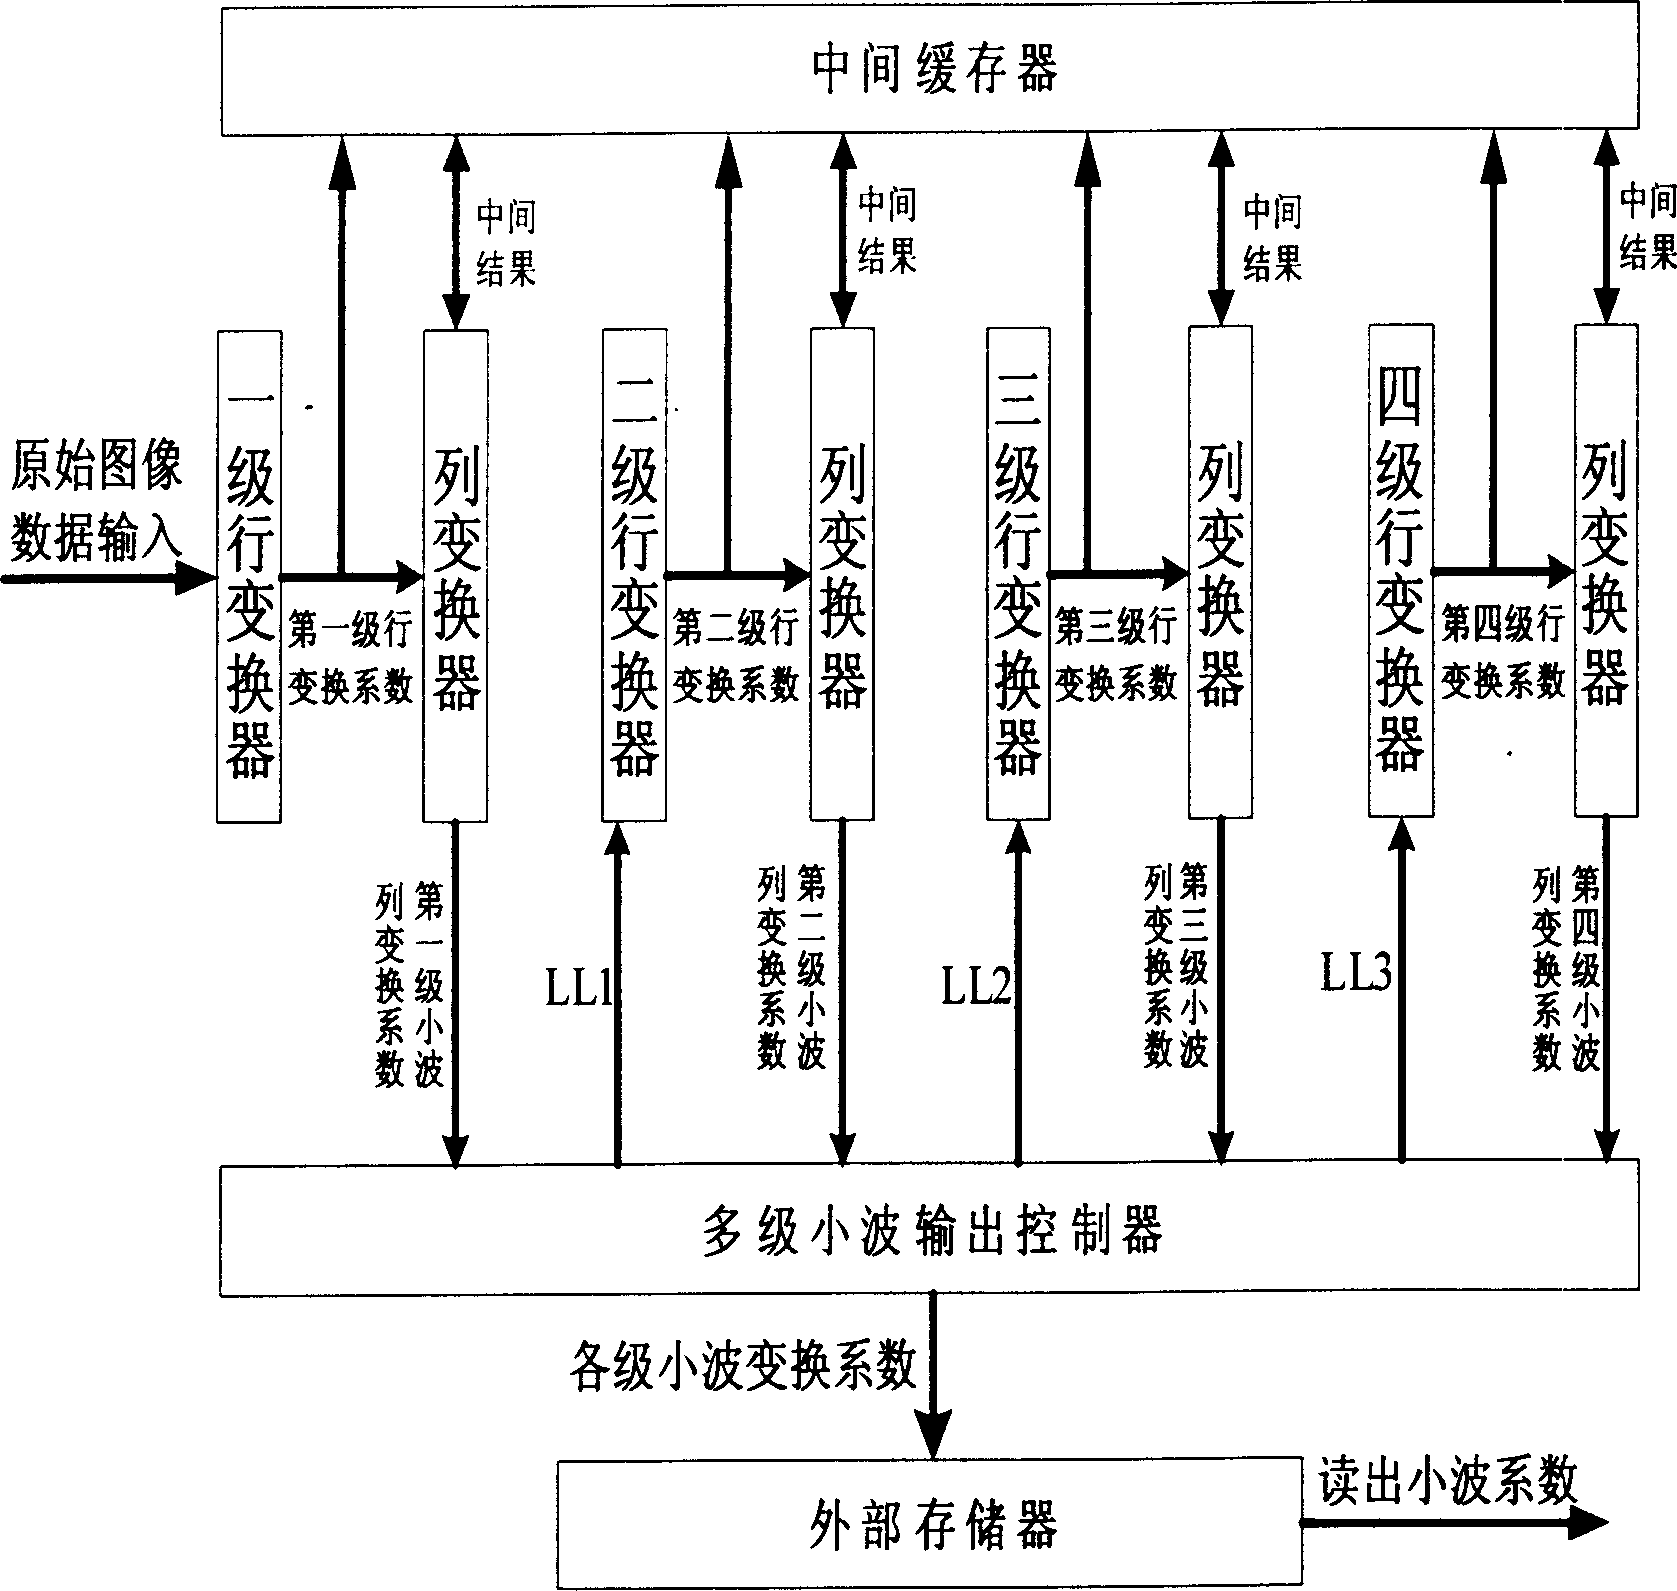 Wavelet changeable VLSI structure based on line